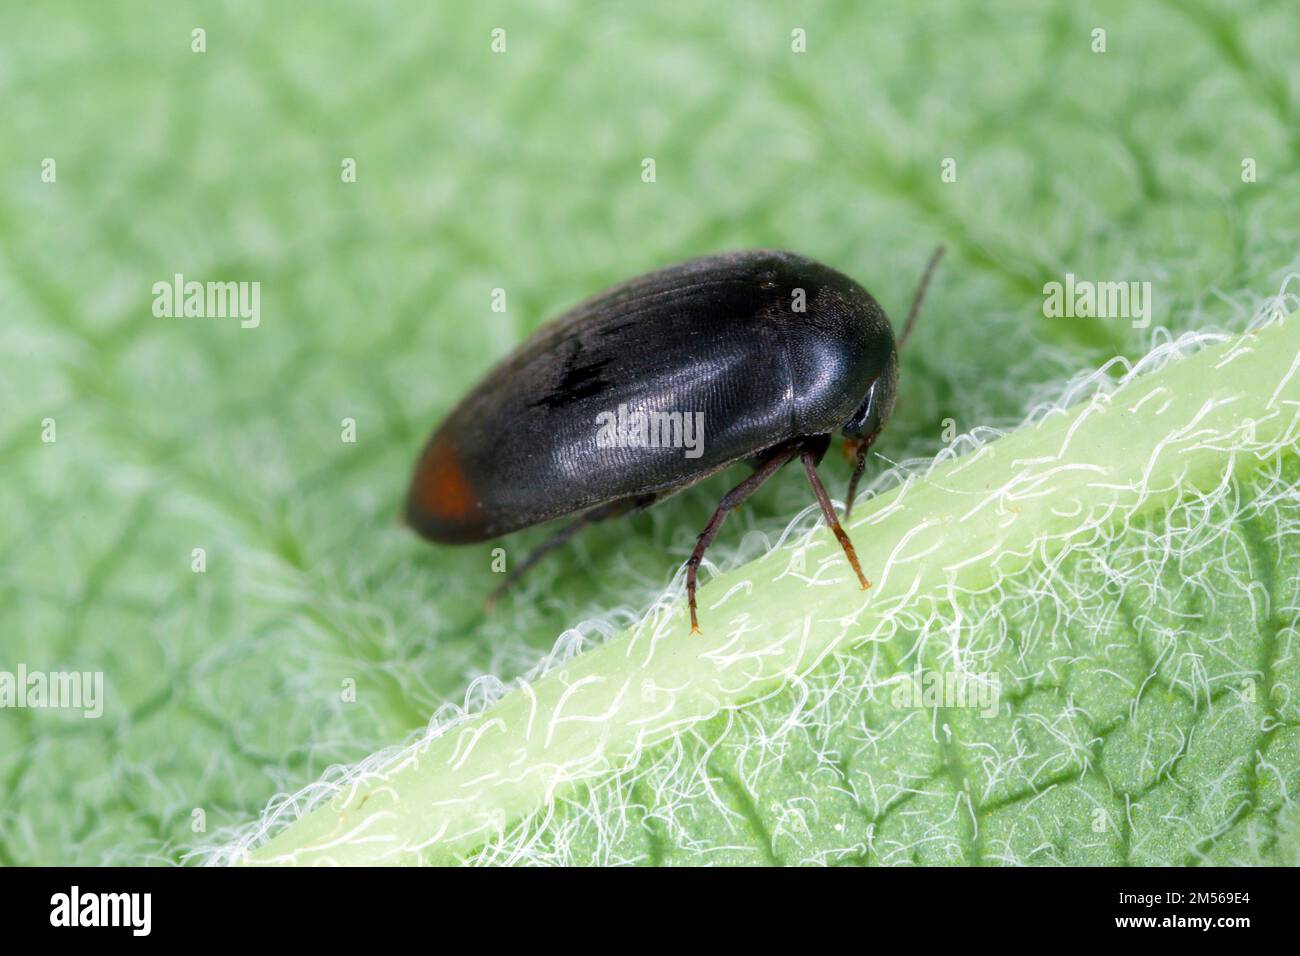 Eucinetus haemorrhoidalis is a species of plate-thigh beetle in the family Eucinetidae, it is holarctic in distribution, including the North American Stock Photo